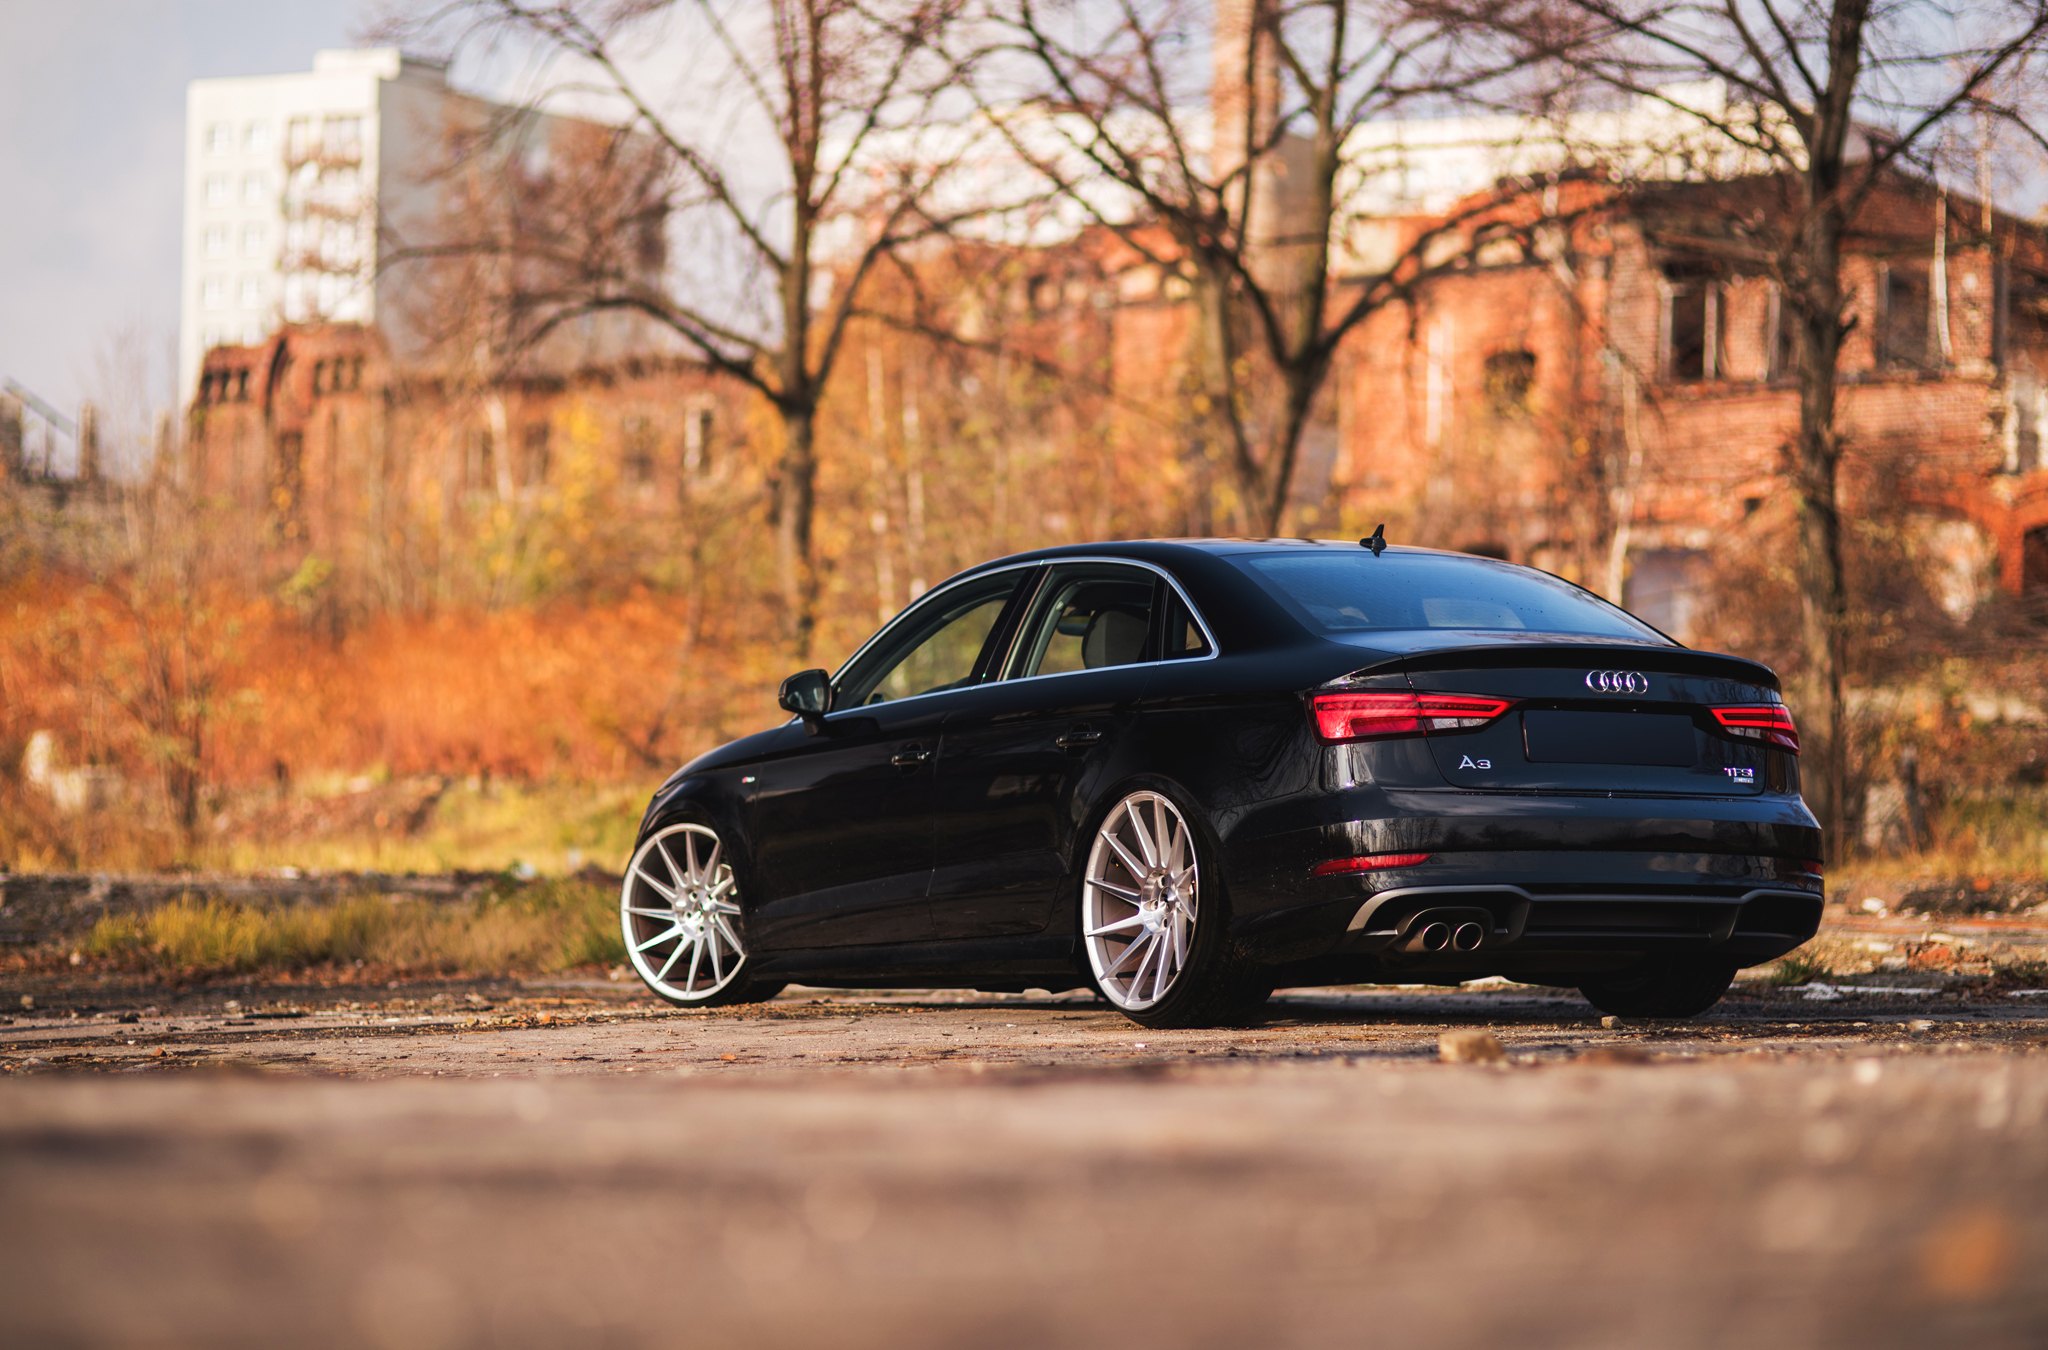 Aftermarket Rear Diffuser on Black Audi A3 - Photo by JR Wheels